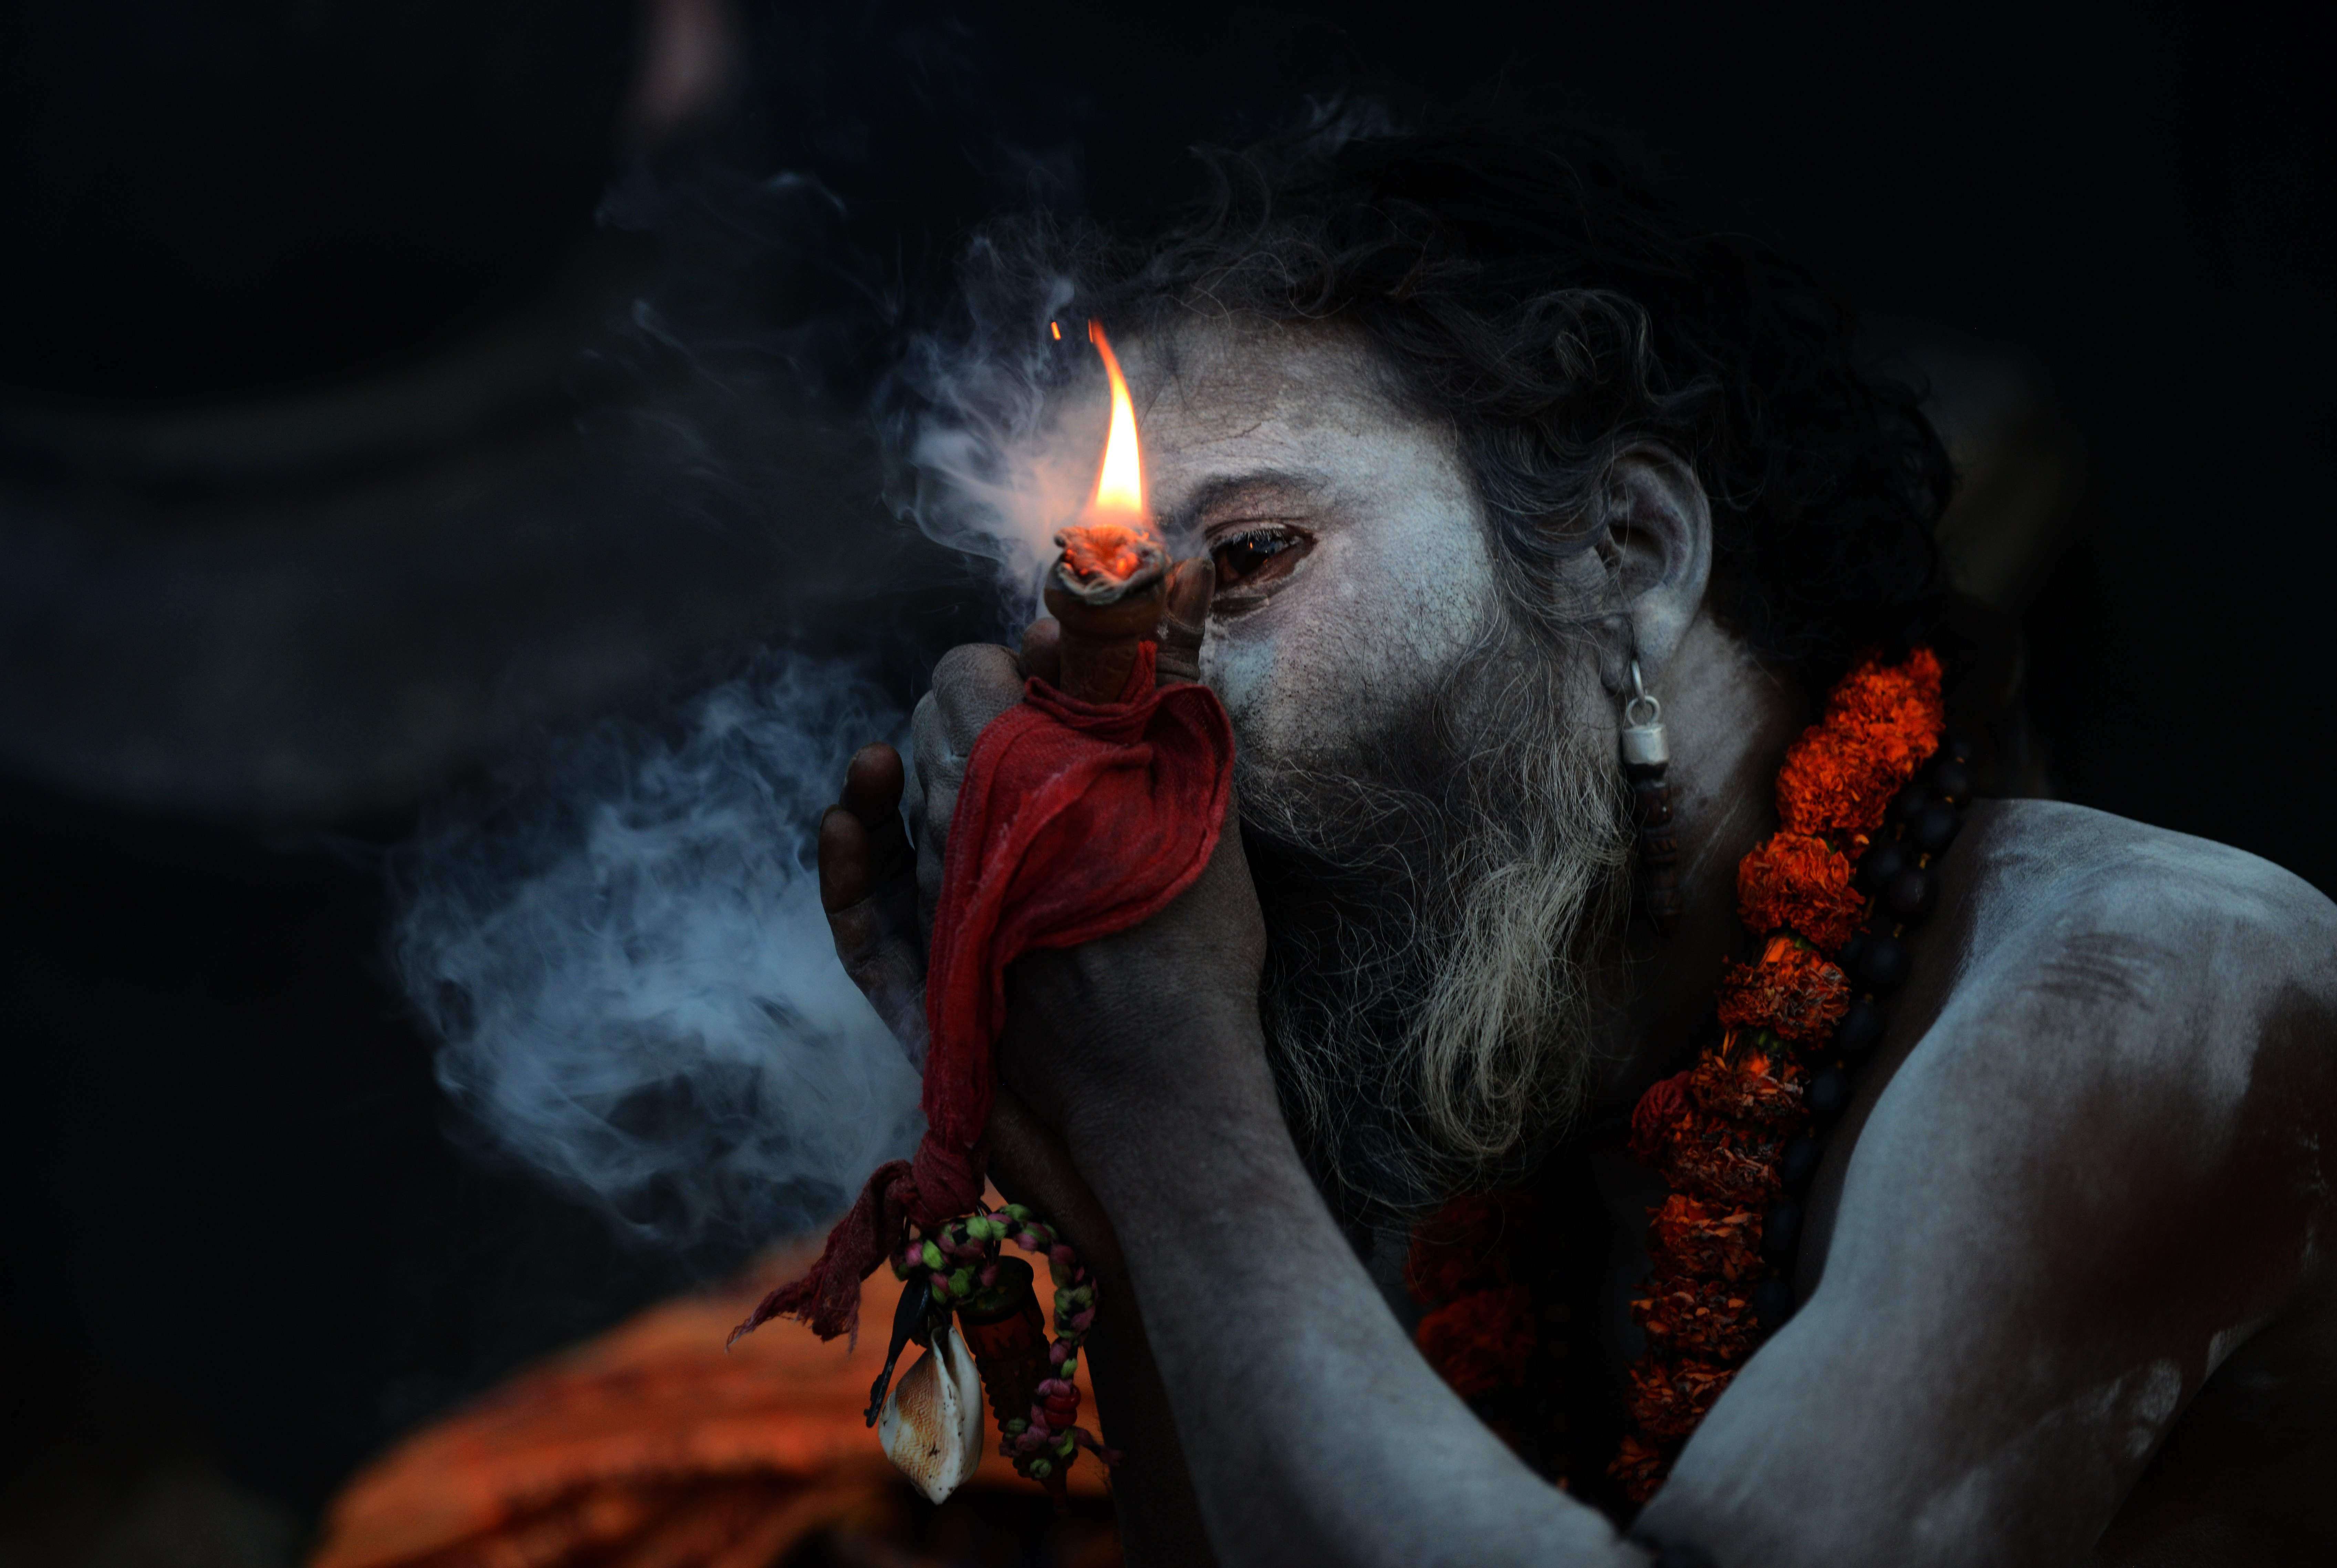 A Sadhu (Hindu holy man), smokes a chillum, a traditional clay pipe, as a holy offering to Lord Shiva, the Hindu god of creation and destruction near the Pashupatinath Temple in Kathmandu on March 6, 2016, on the eve of the Hindu festival Maha Shivaratri. Hindus mark the Maha Shivratri festival by offering special prayers and fasting. / AFP / PRAKASH MATHEMA